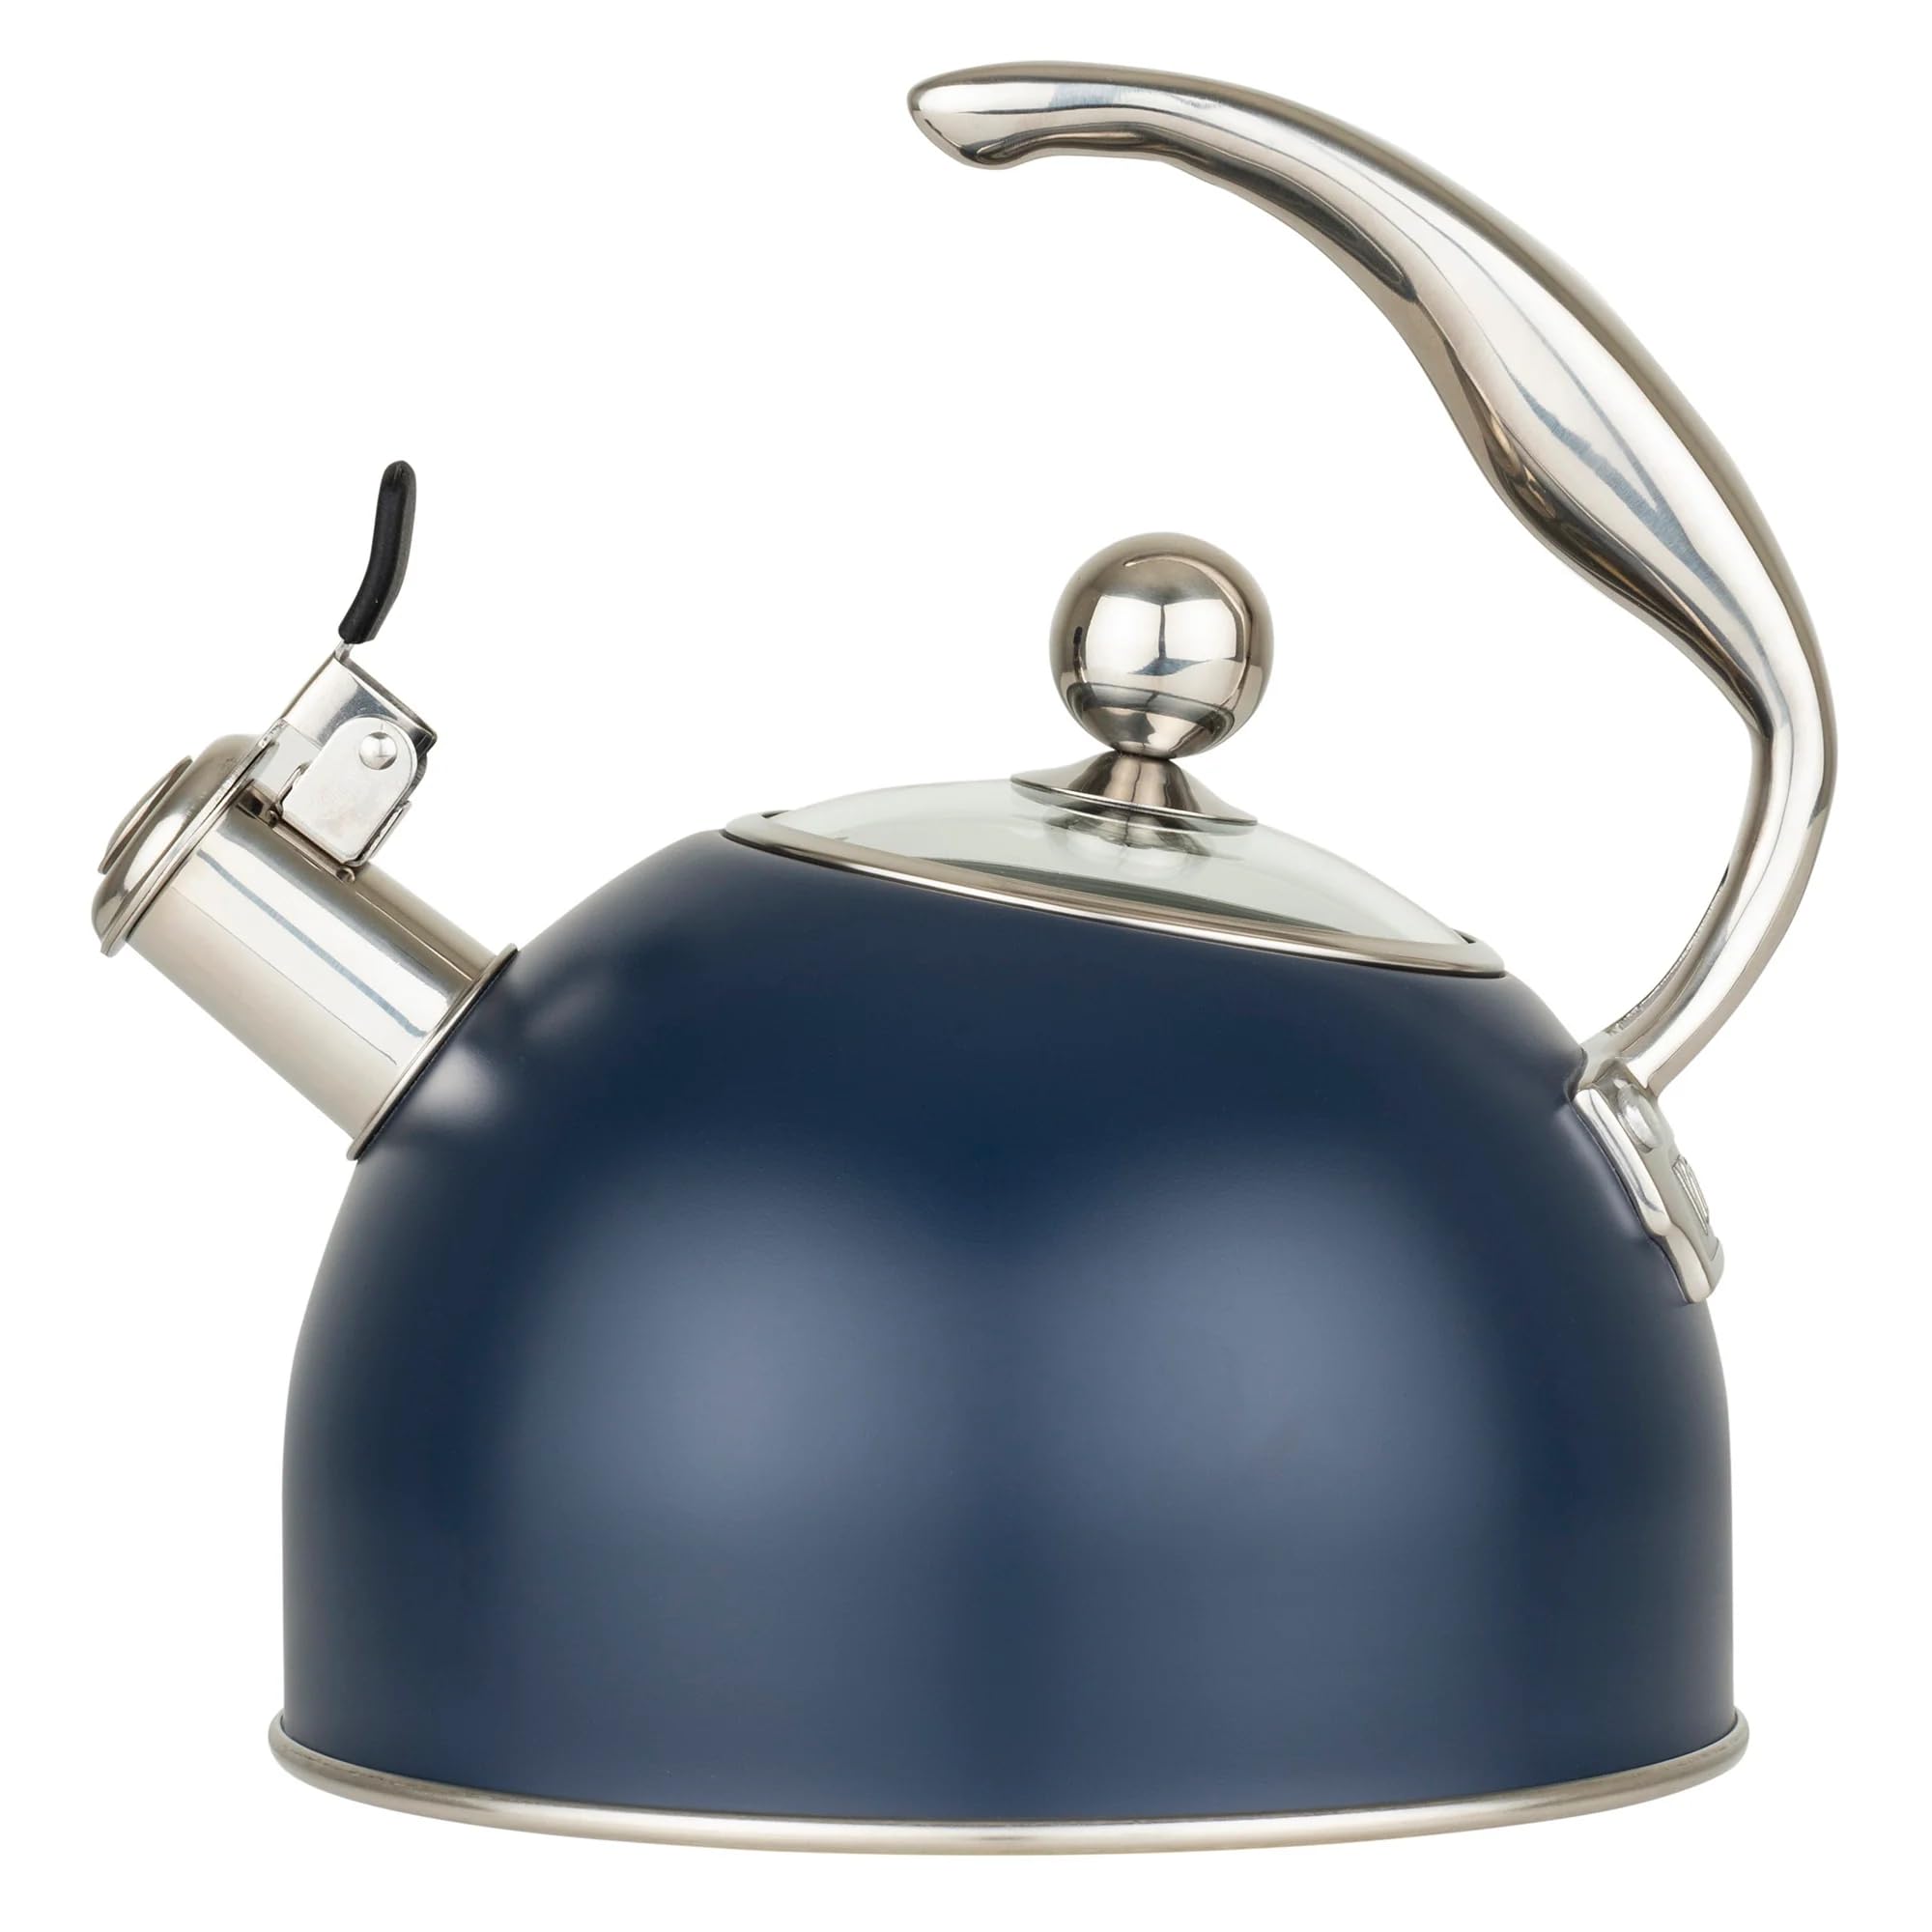 Viking Culinary 3-Ply Stainless Steel Whistling Tea Kettle, 2.6 Quart, Includes Tempered Glass Lid, Ergonomic Stay-Cool Handle, Works on All Cooktops including Induction, Slate Blue